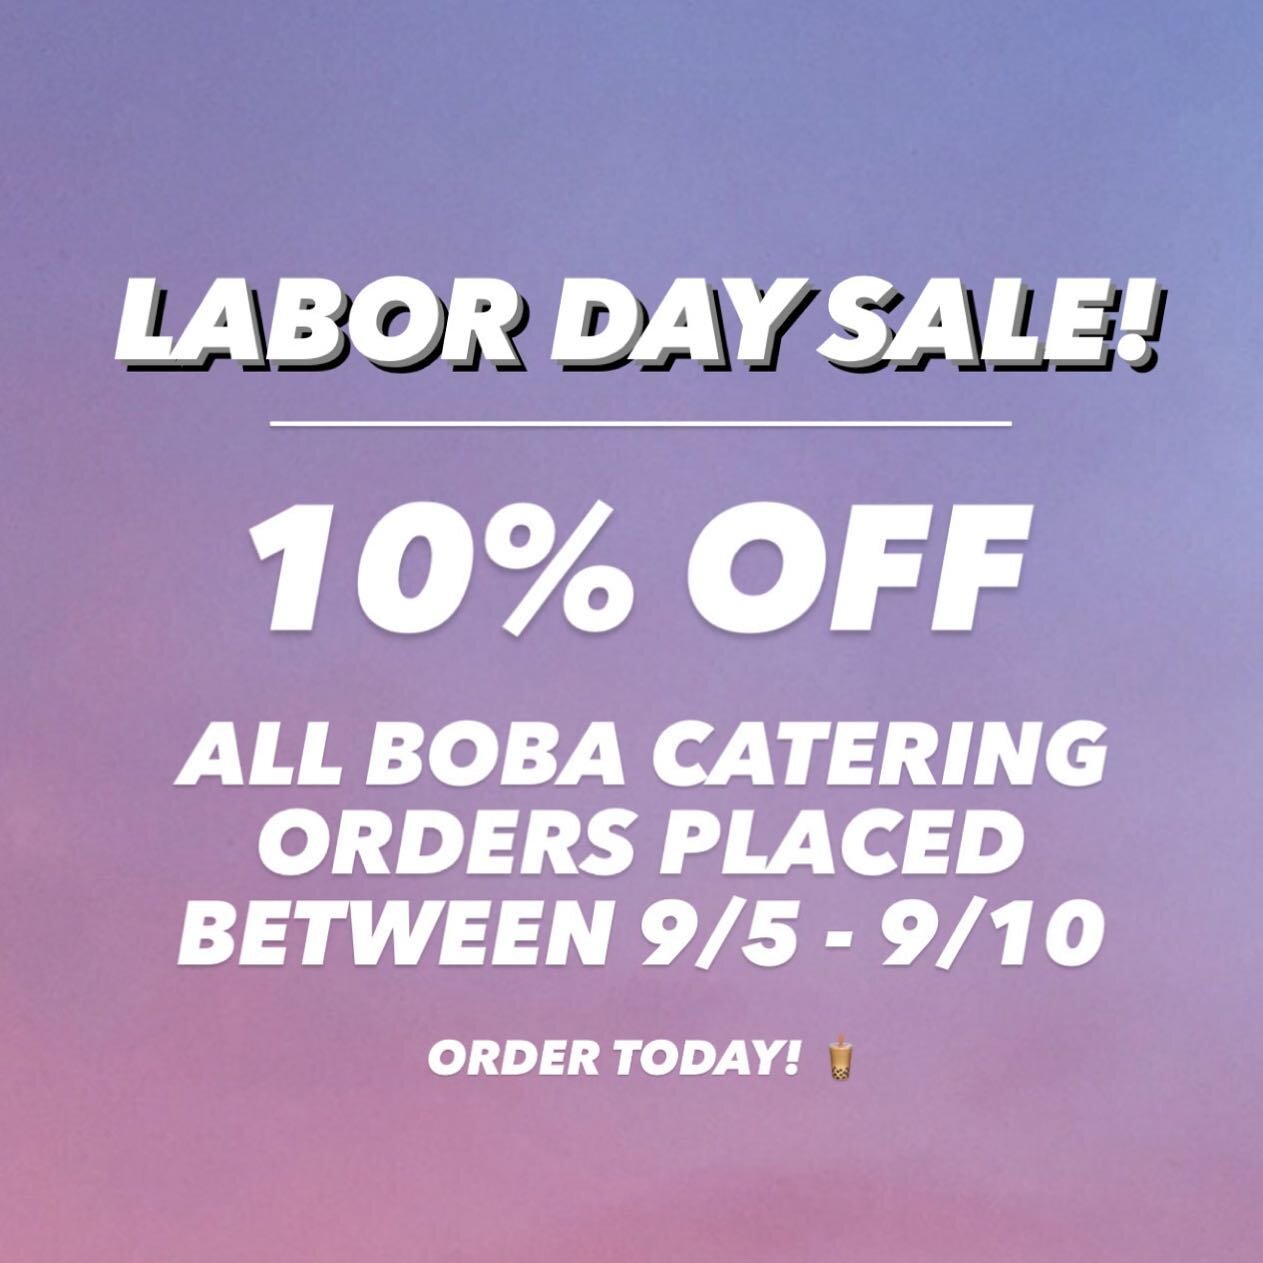 BOBA LABOR DAY SALE! 🧋 

Seattle, want boba for your birthday, wedding, party, etc? Place your order between 9/5 and 9/10 and receive 10% OFF your ENTIRE ORDER! 🤩

* Minimum 25 bobas per order required
* Applies to both 12oz and 16oz drinks
* Disco